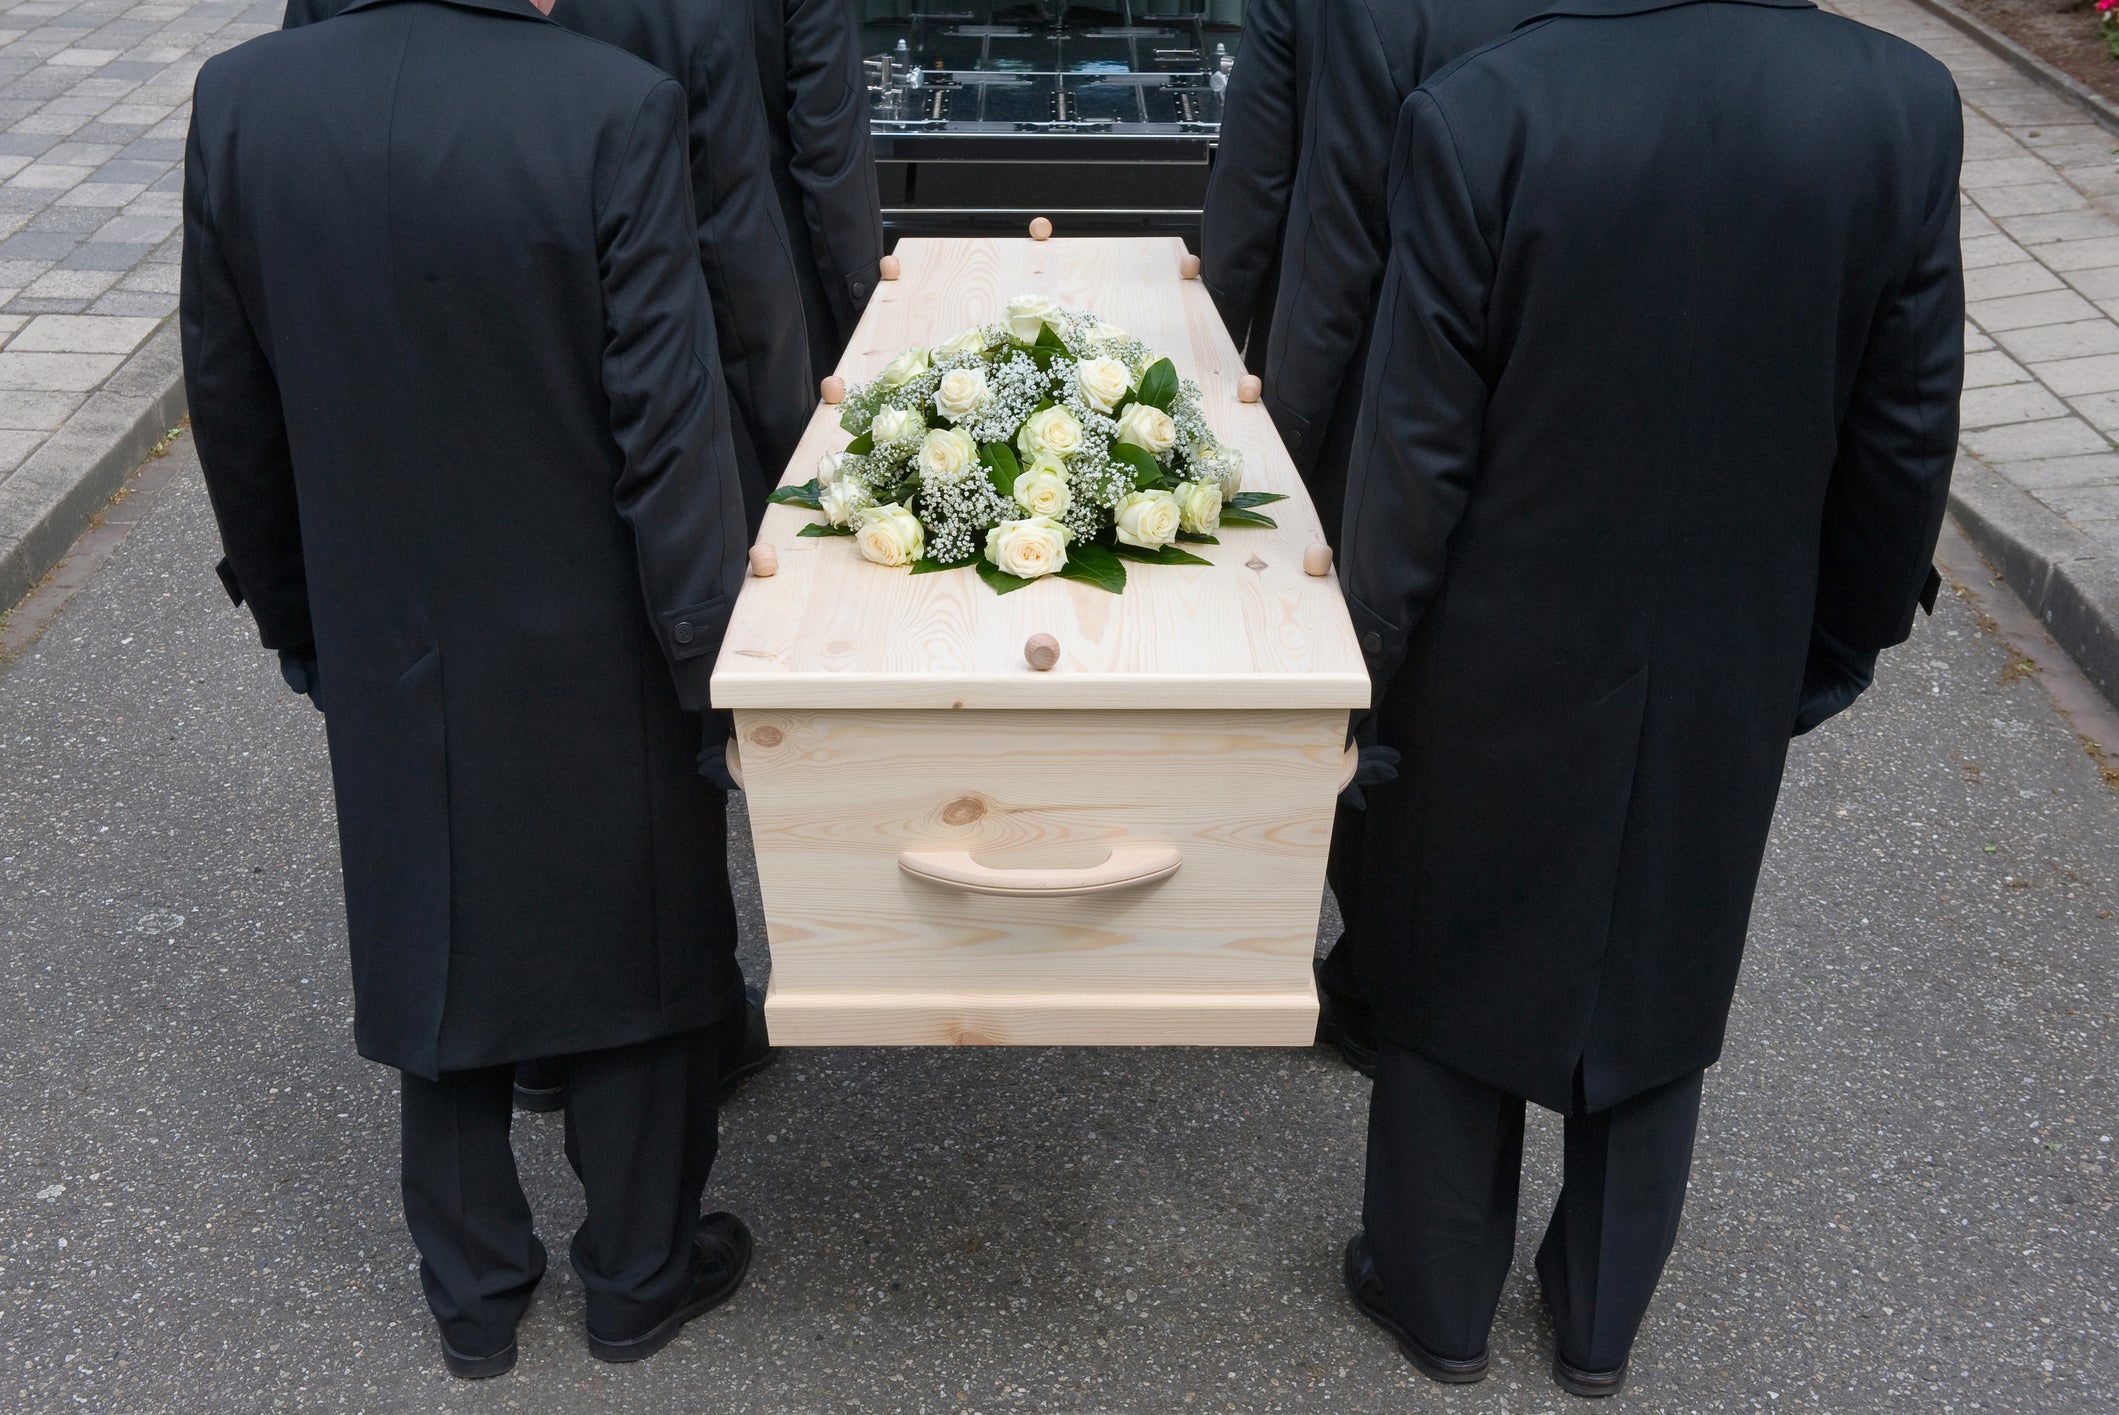 Soaring living costs have even impacting the amount people have to pay for funerals